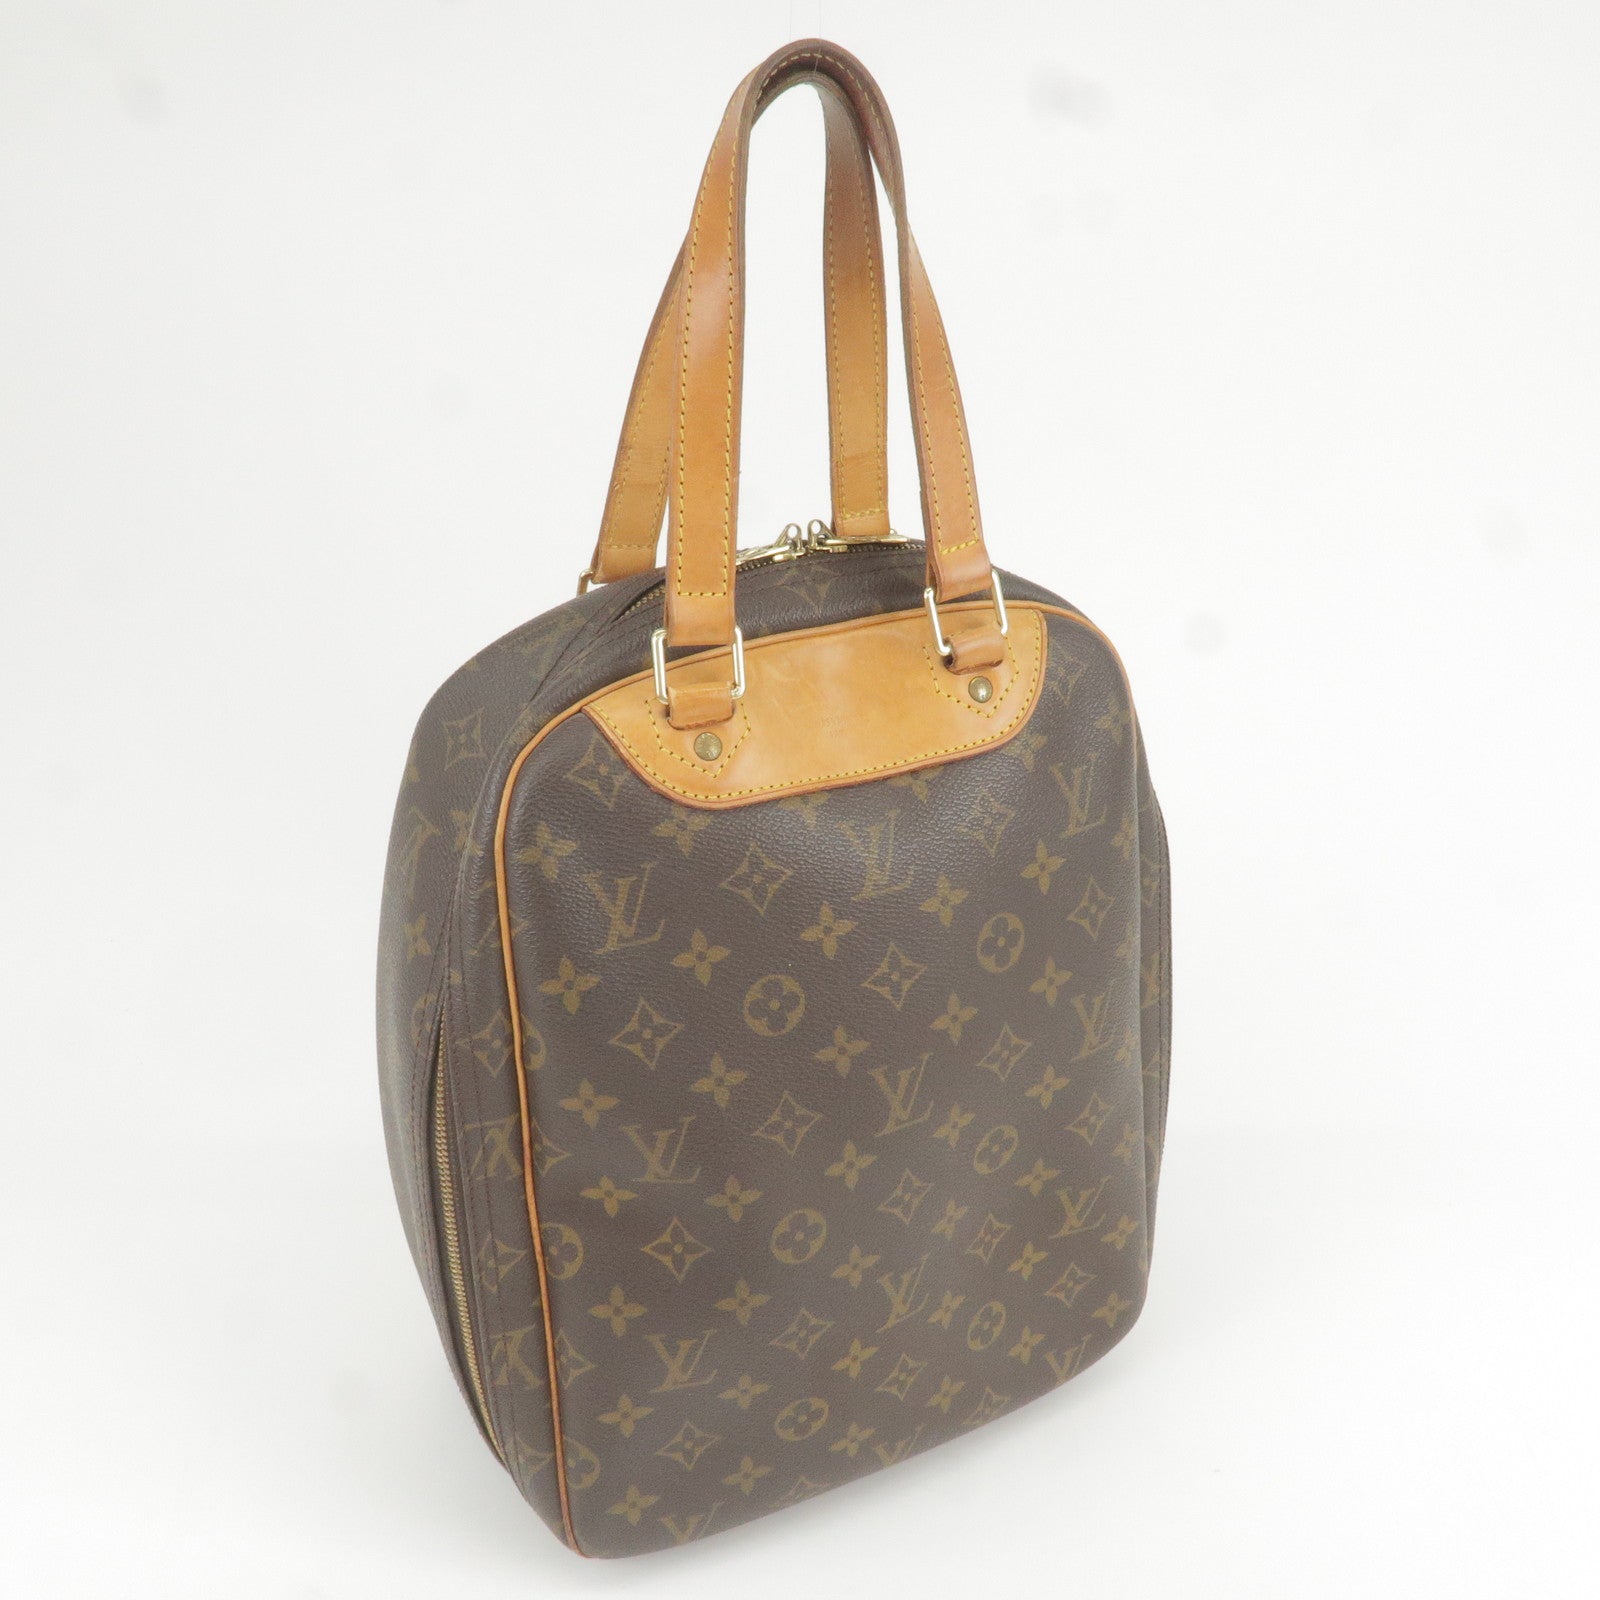 WHAT'S IN MY LOUIS VUITTON EXCURSION BAG